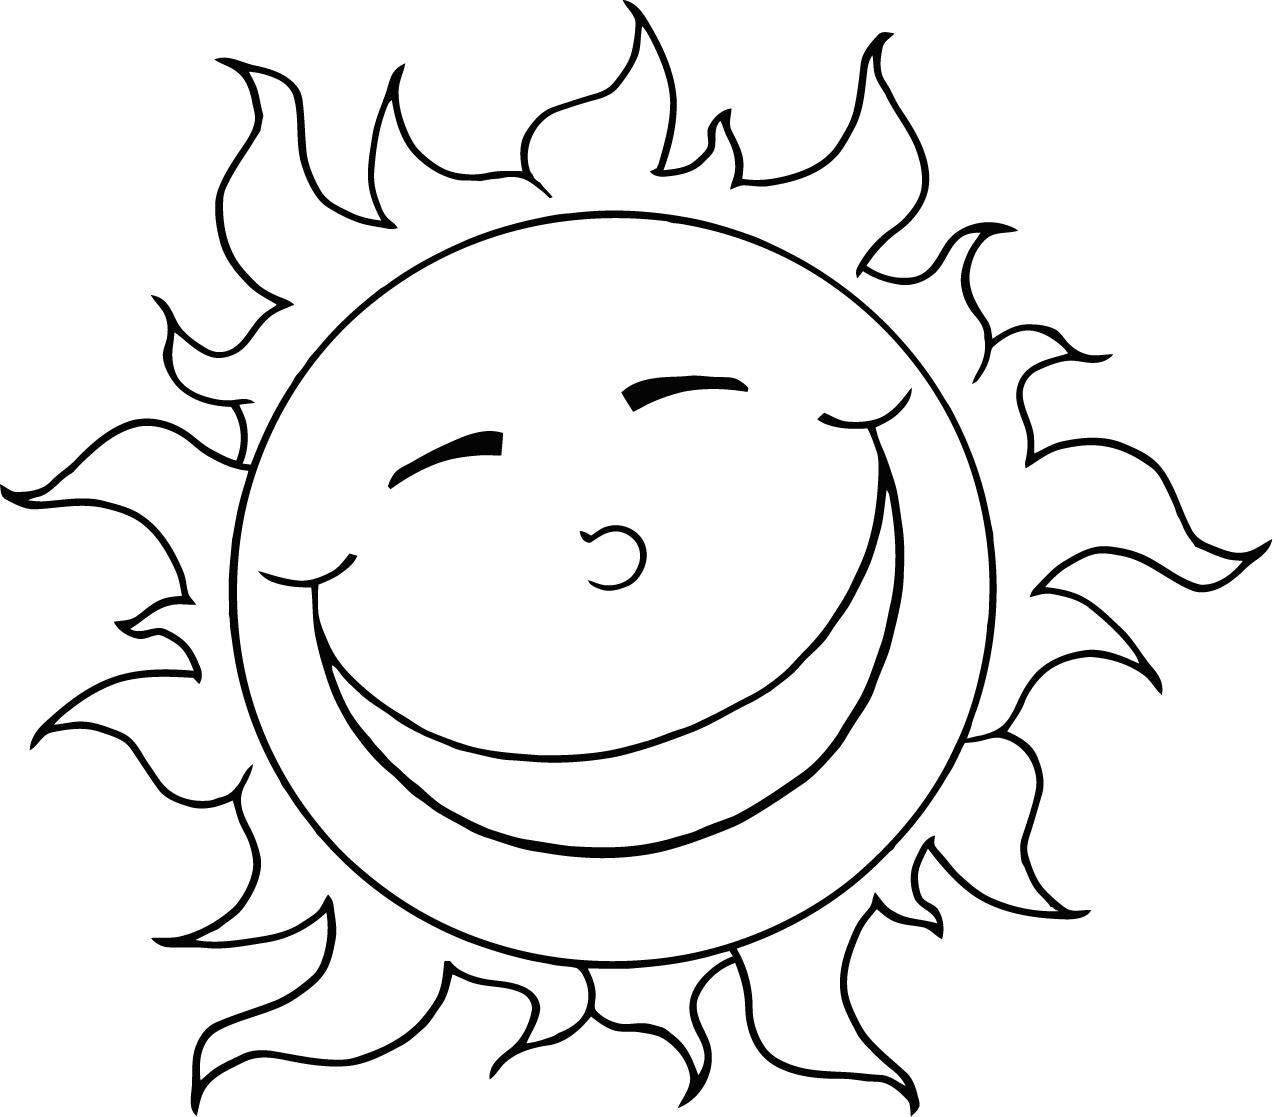 Sun Coloring Pages To Download And Print For Free